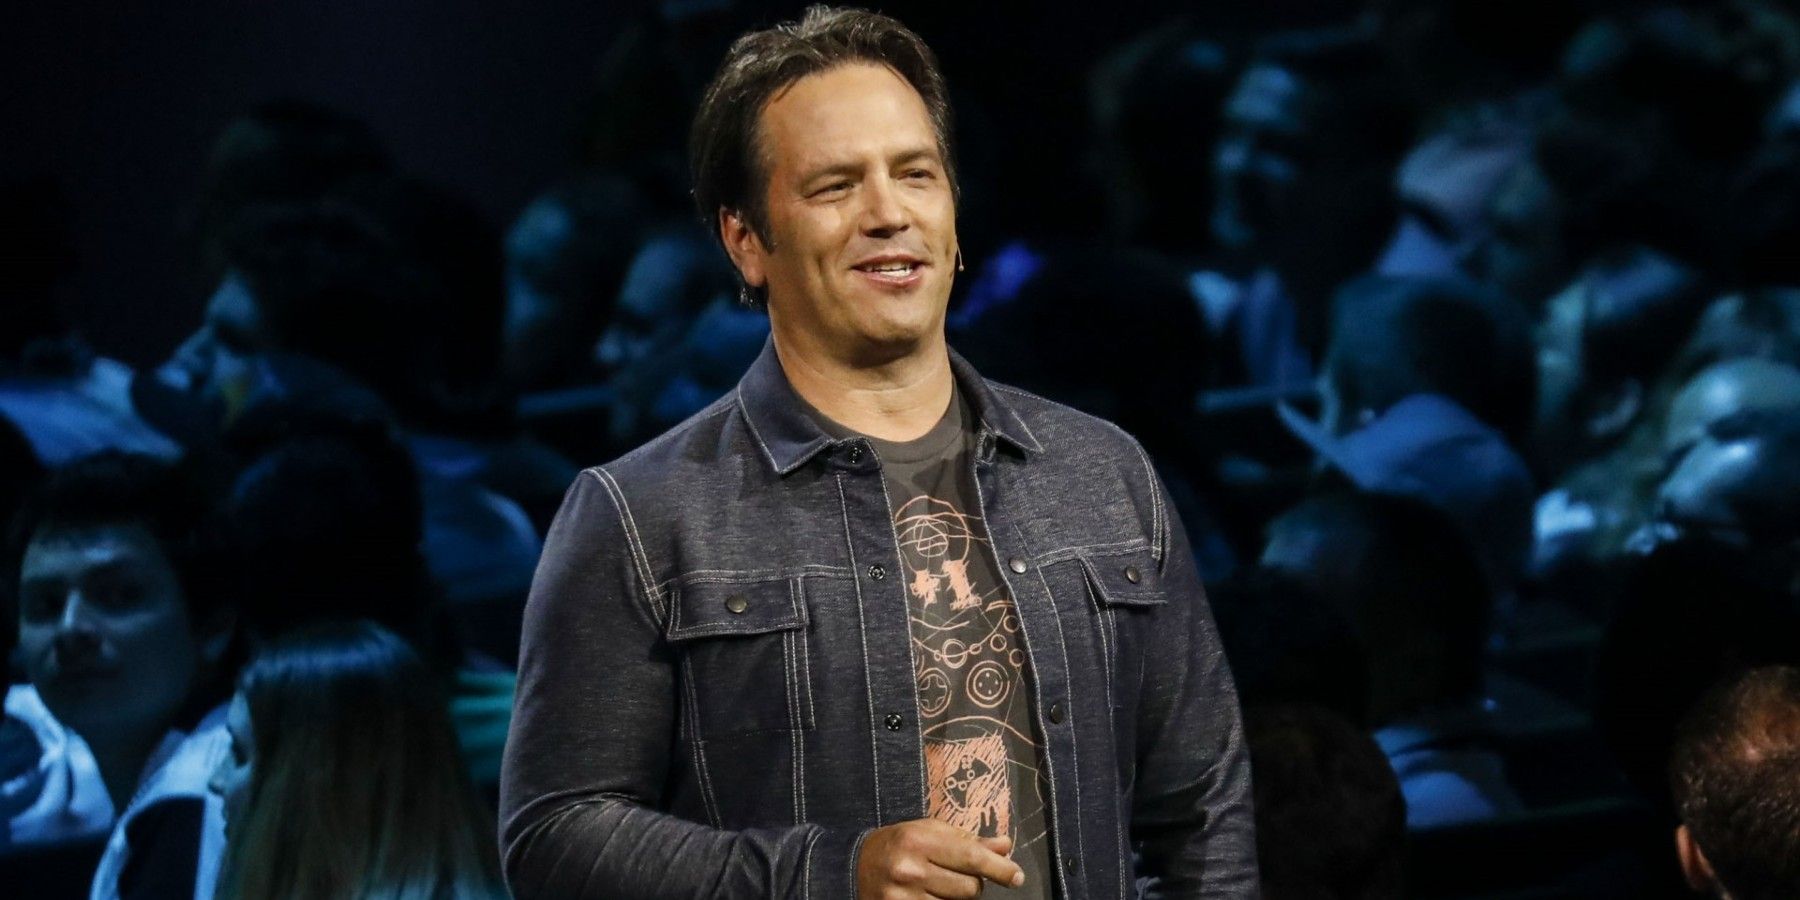 Phil Spencer to Receive Lifetime Achievement Award at 25th Annual